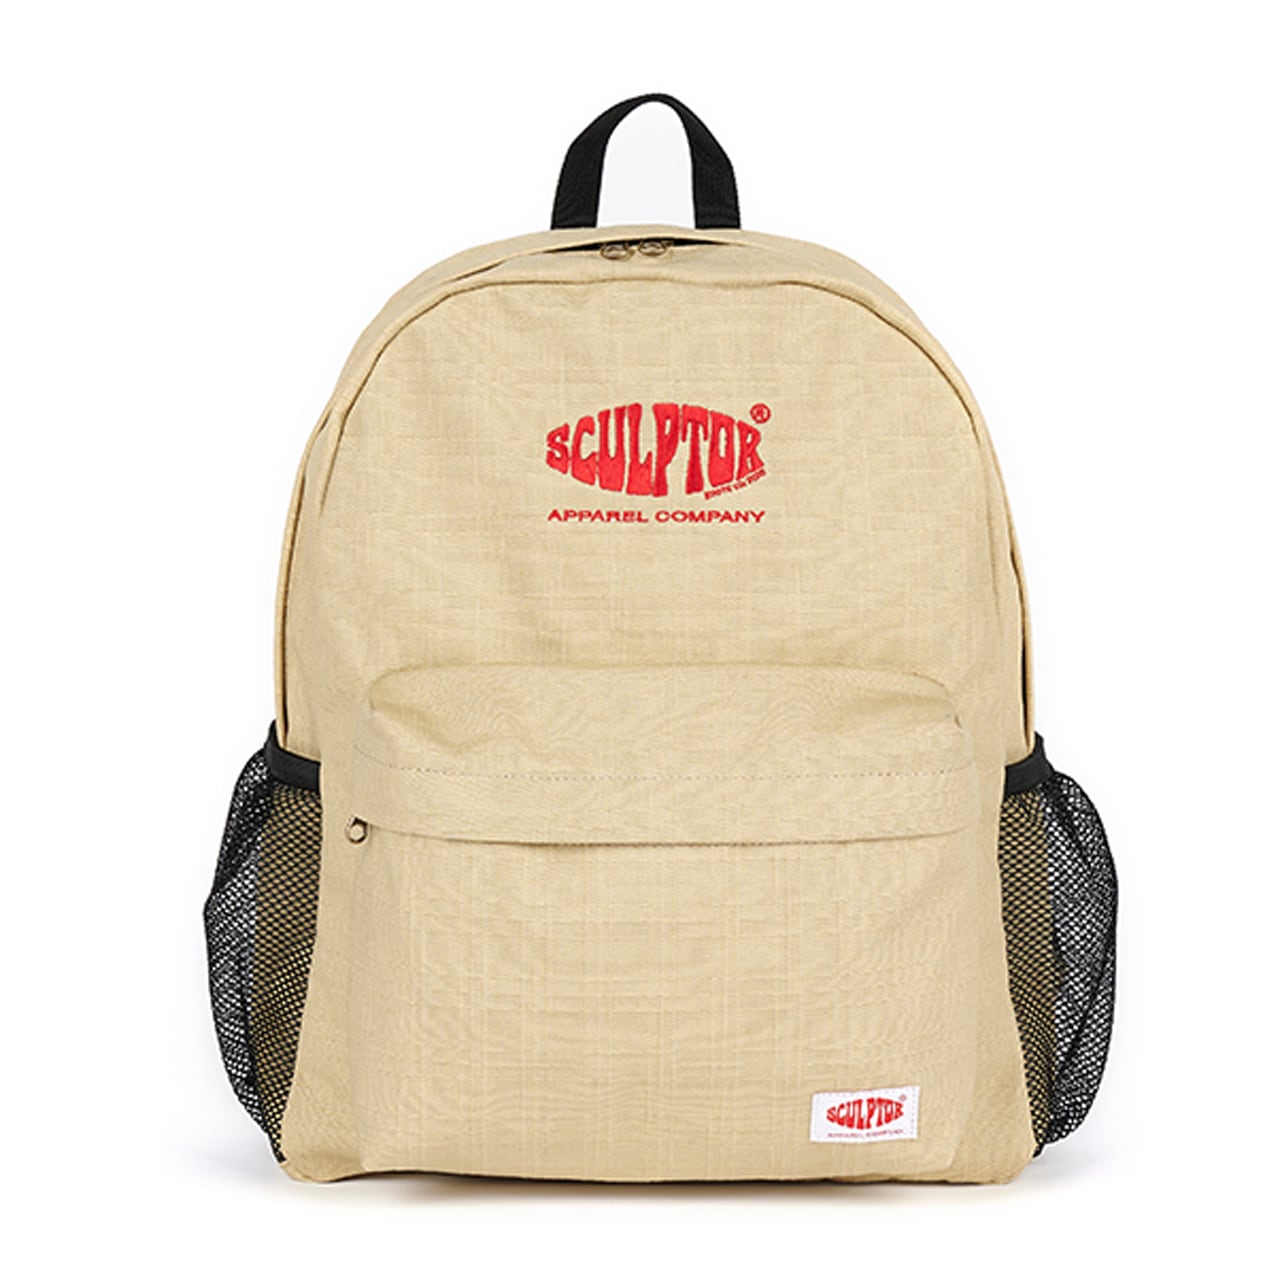 [SCULPTOR] Oxford Backpack [BEIGE SQUARE] 正規品 韓国 ブランド バックパック リュック カバン |  BONZ (韓国ブランド 代行) powered by BASE